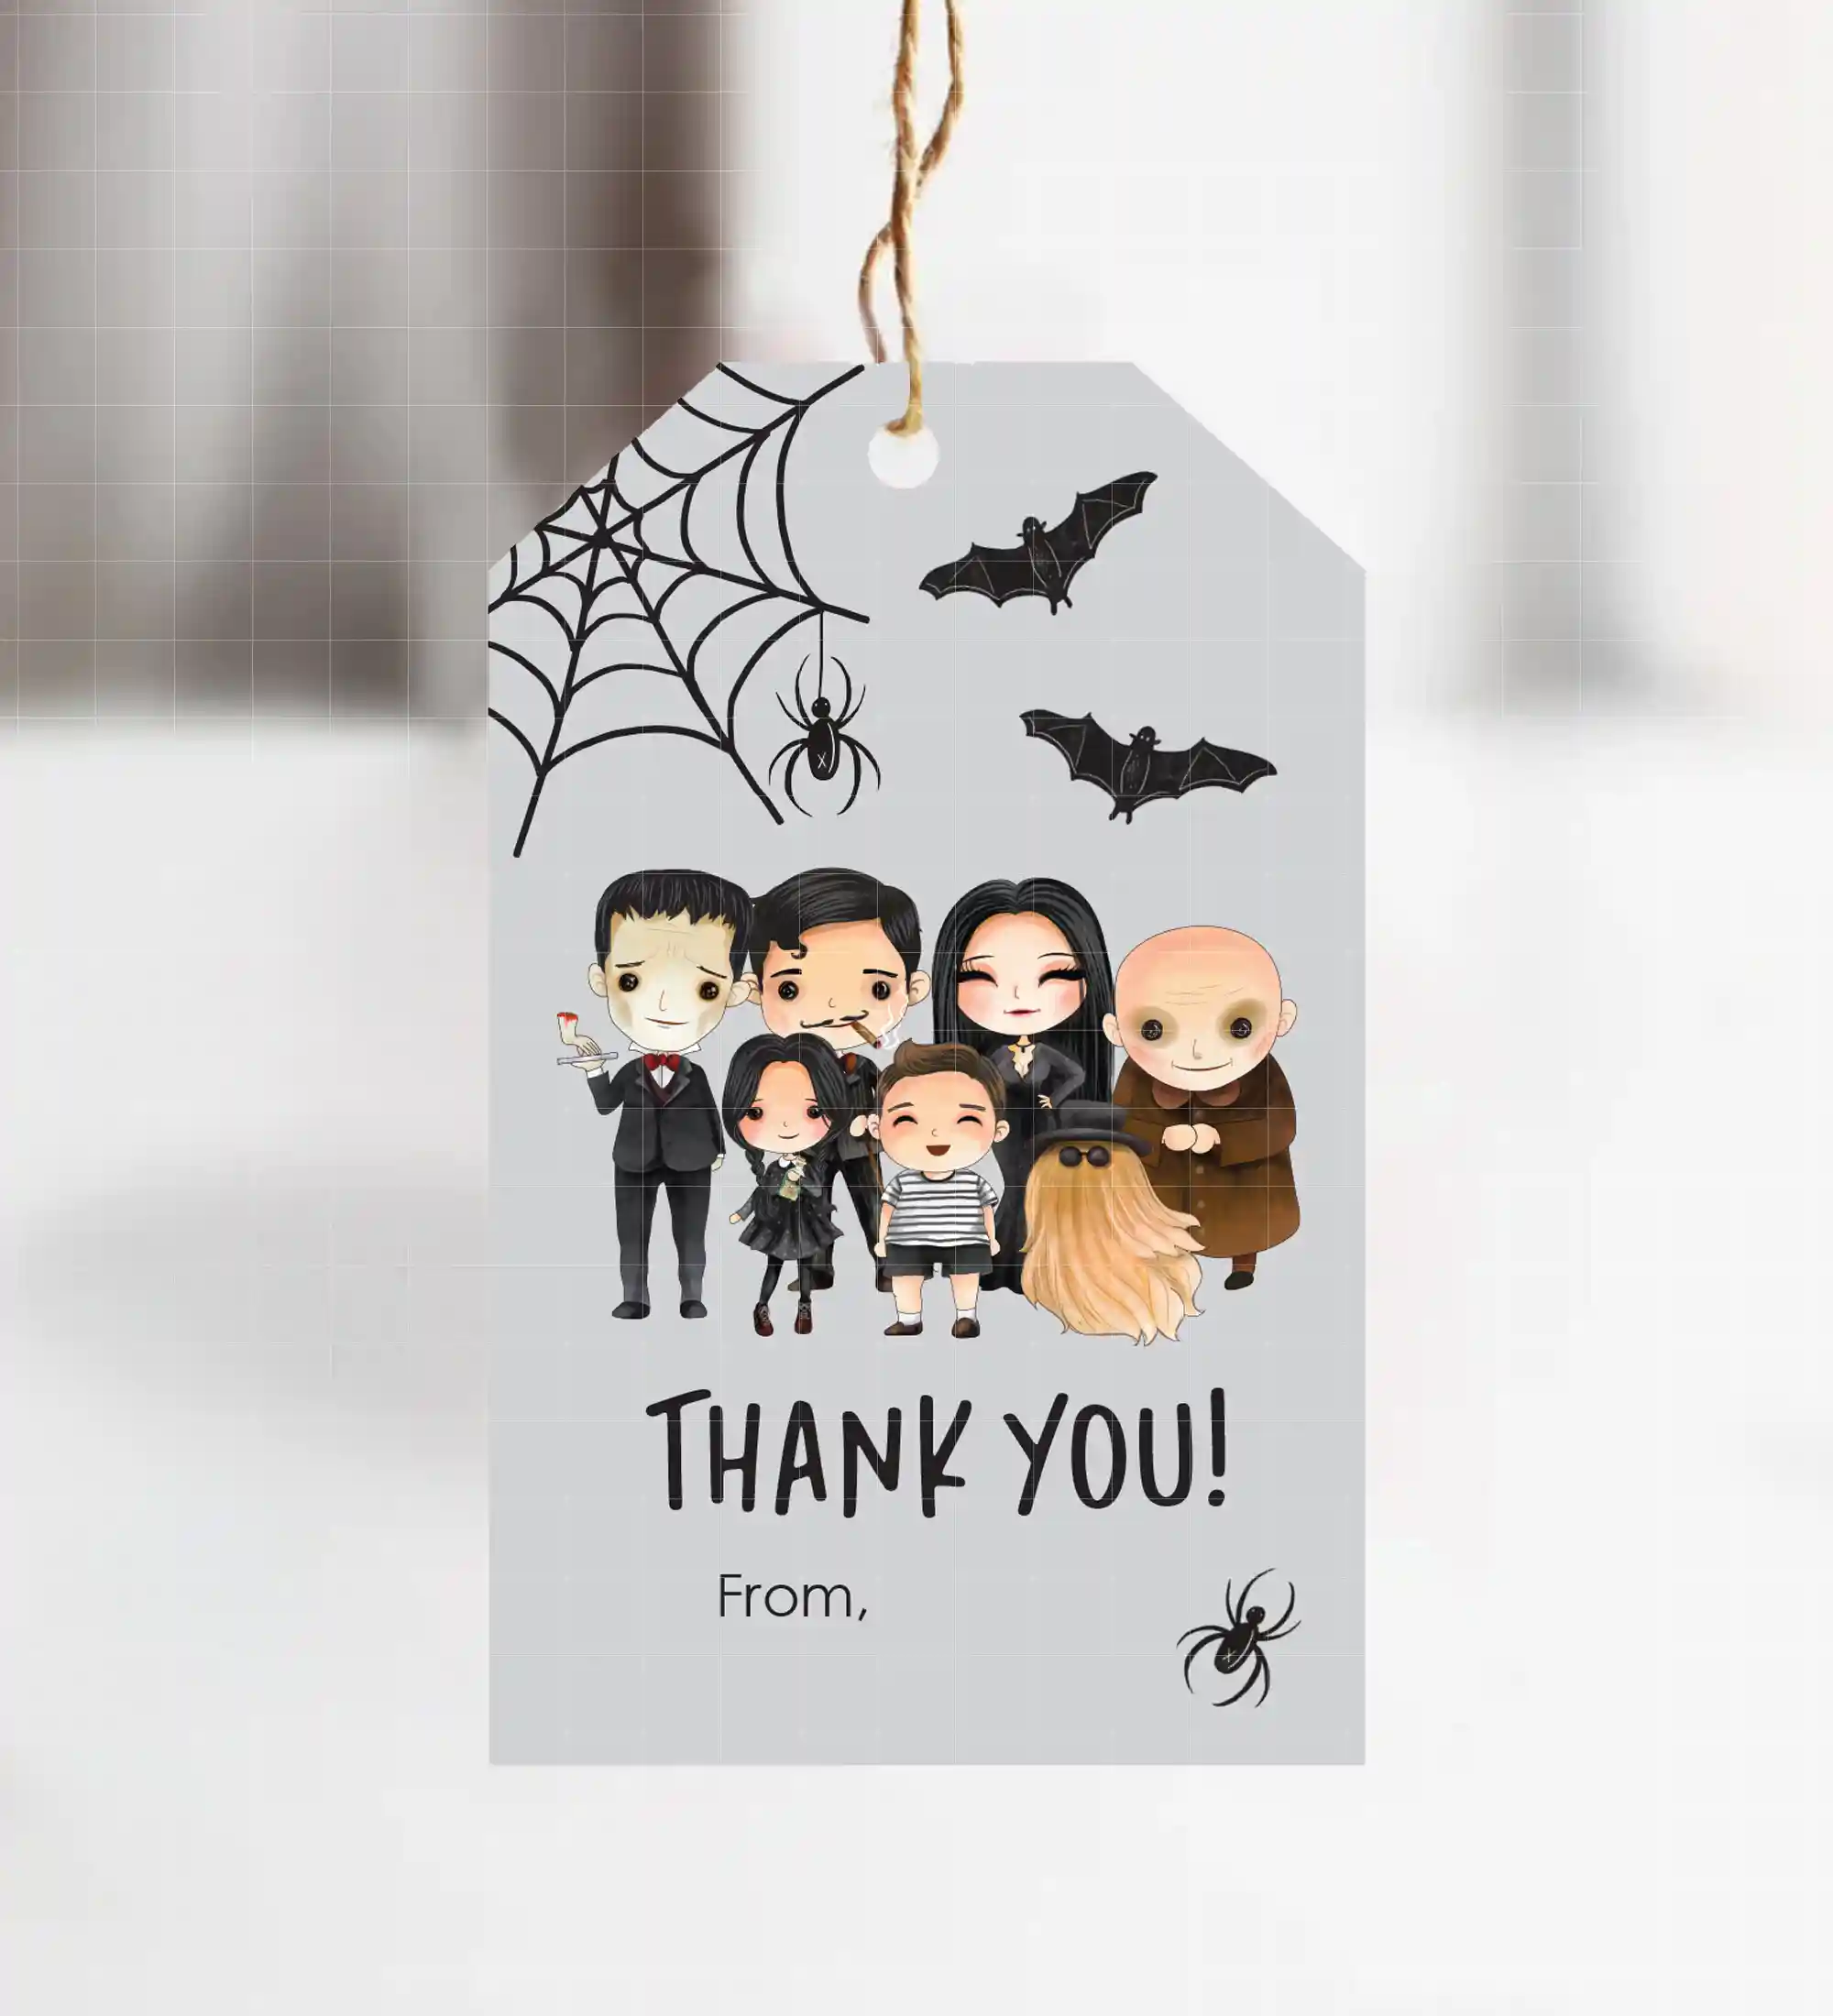 Addams family thank you tags for your party favors. Download the printables for a Wednesday birthday party, Addams Family themed baby shower, or a Wednesday viewing party. Includes Cousin Itt, Wednesday, Morticia, Gomez, Lurch, and more.